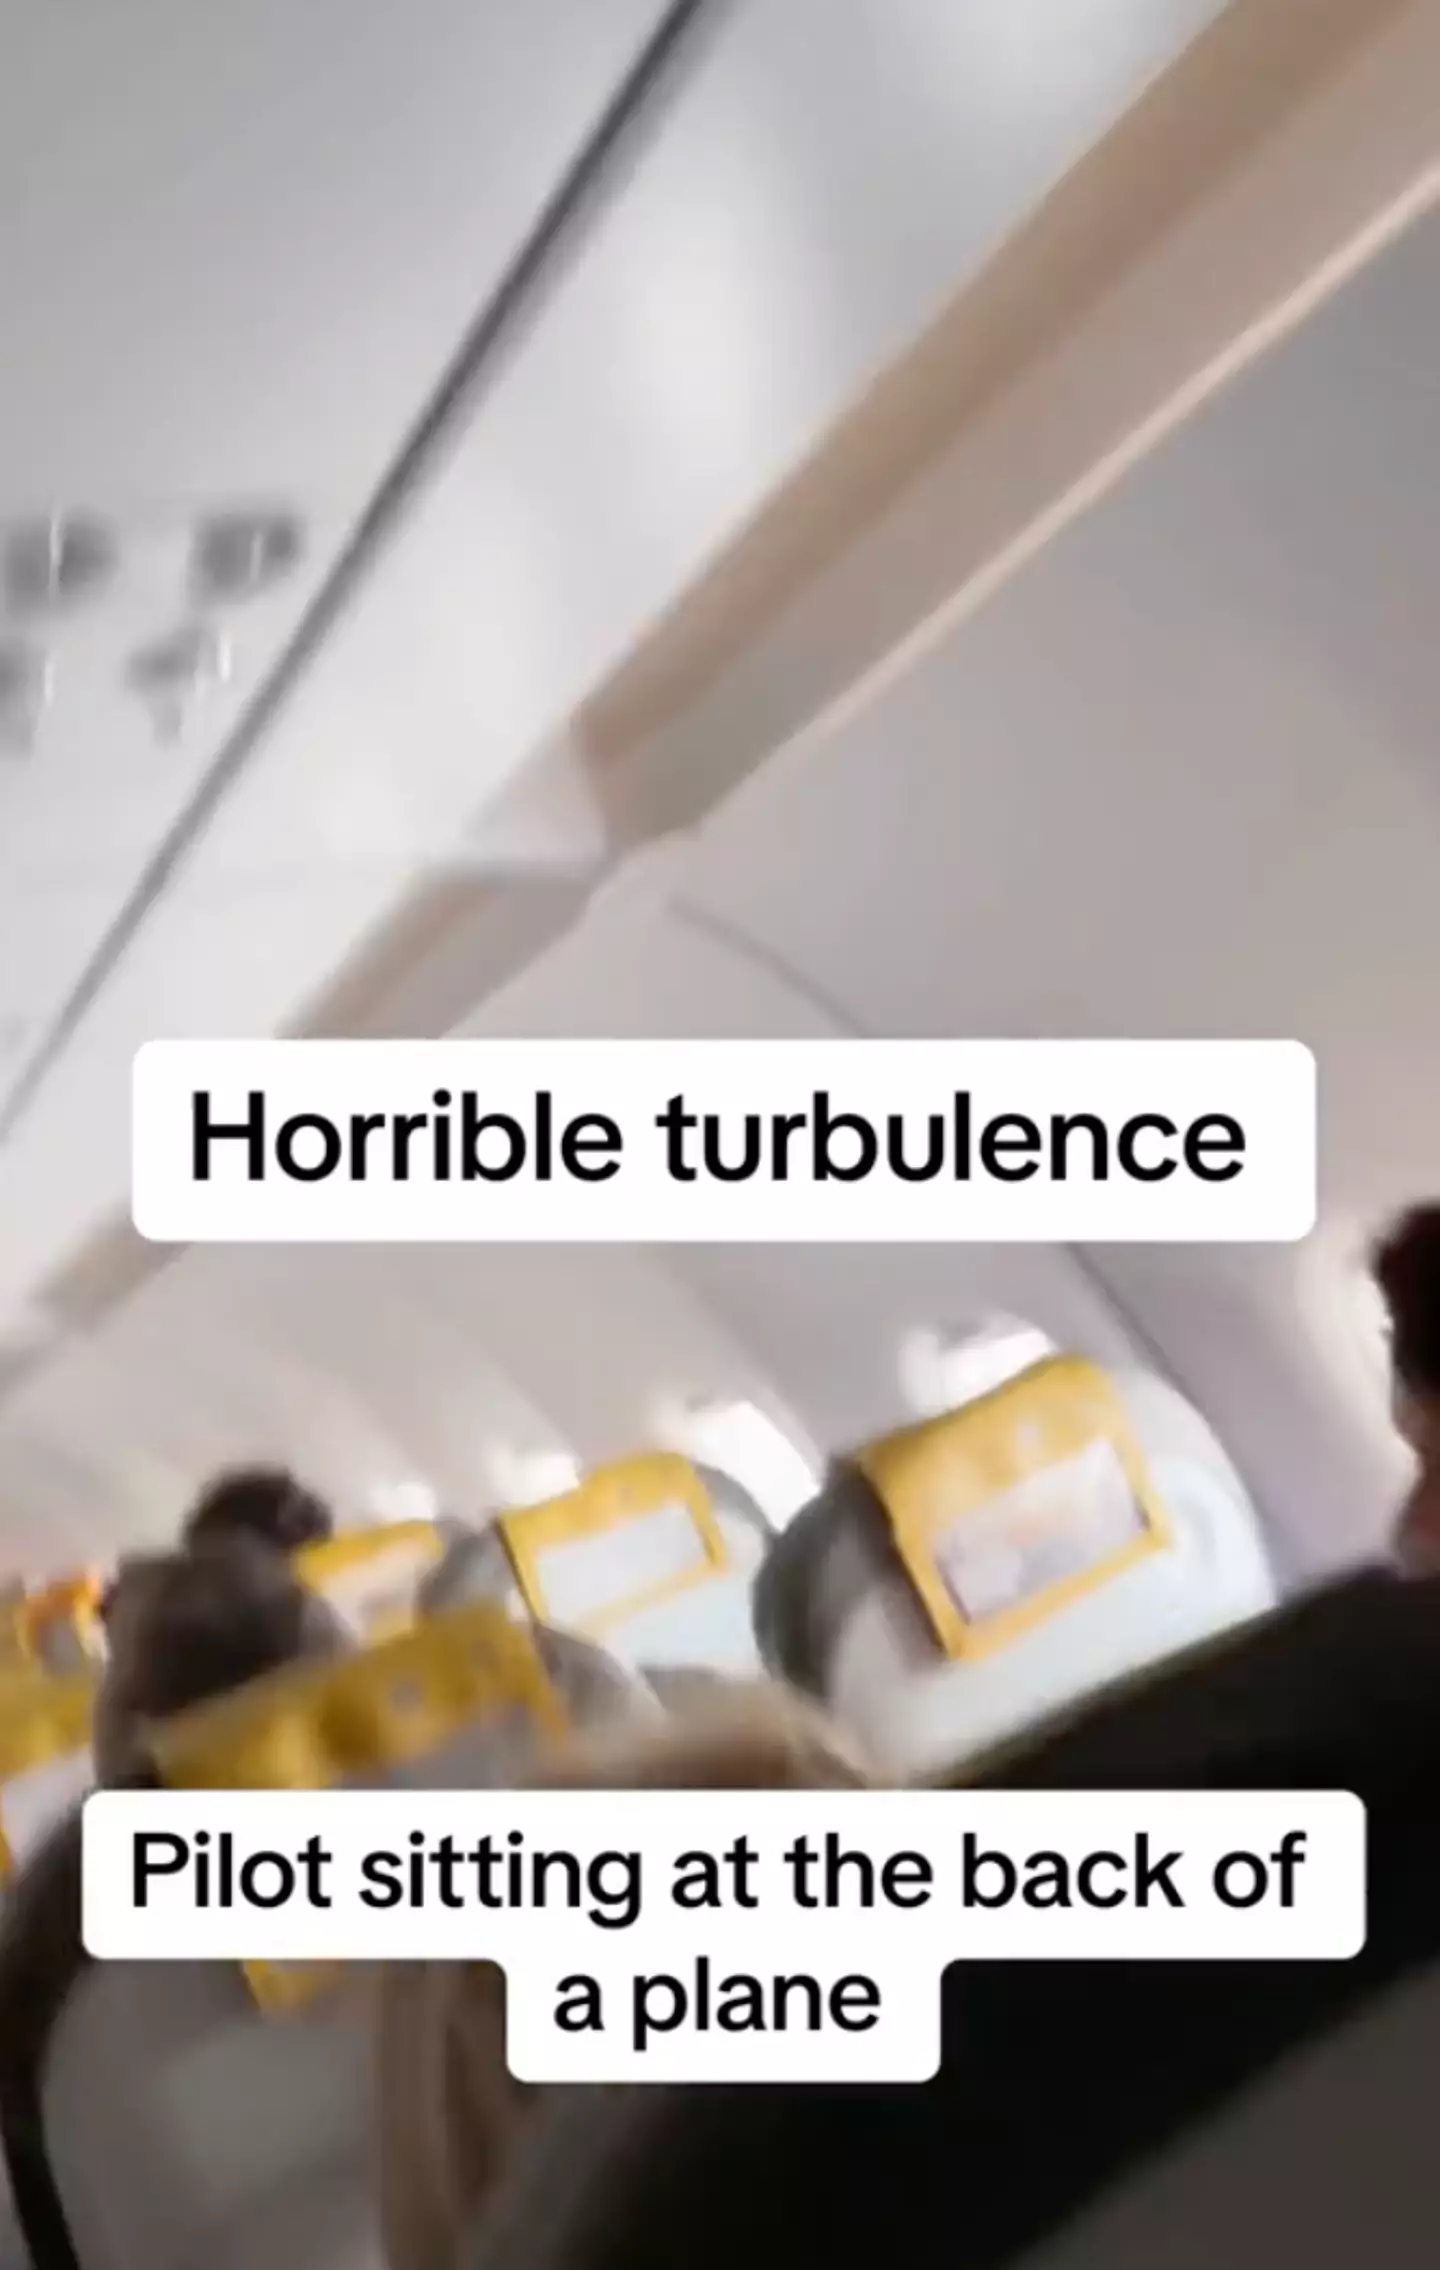 He said it was some of the worst turbulence he'd ever experienced.